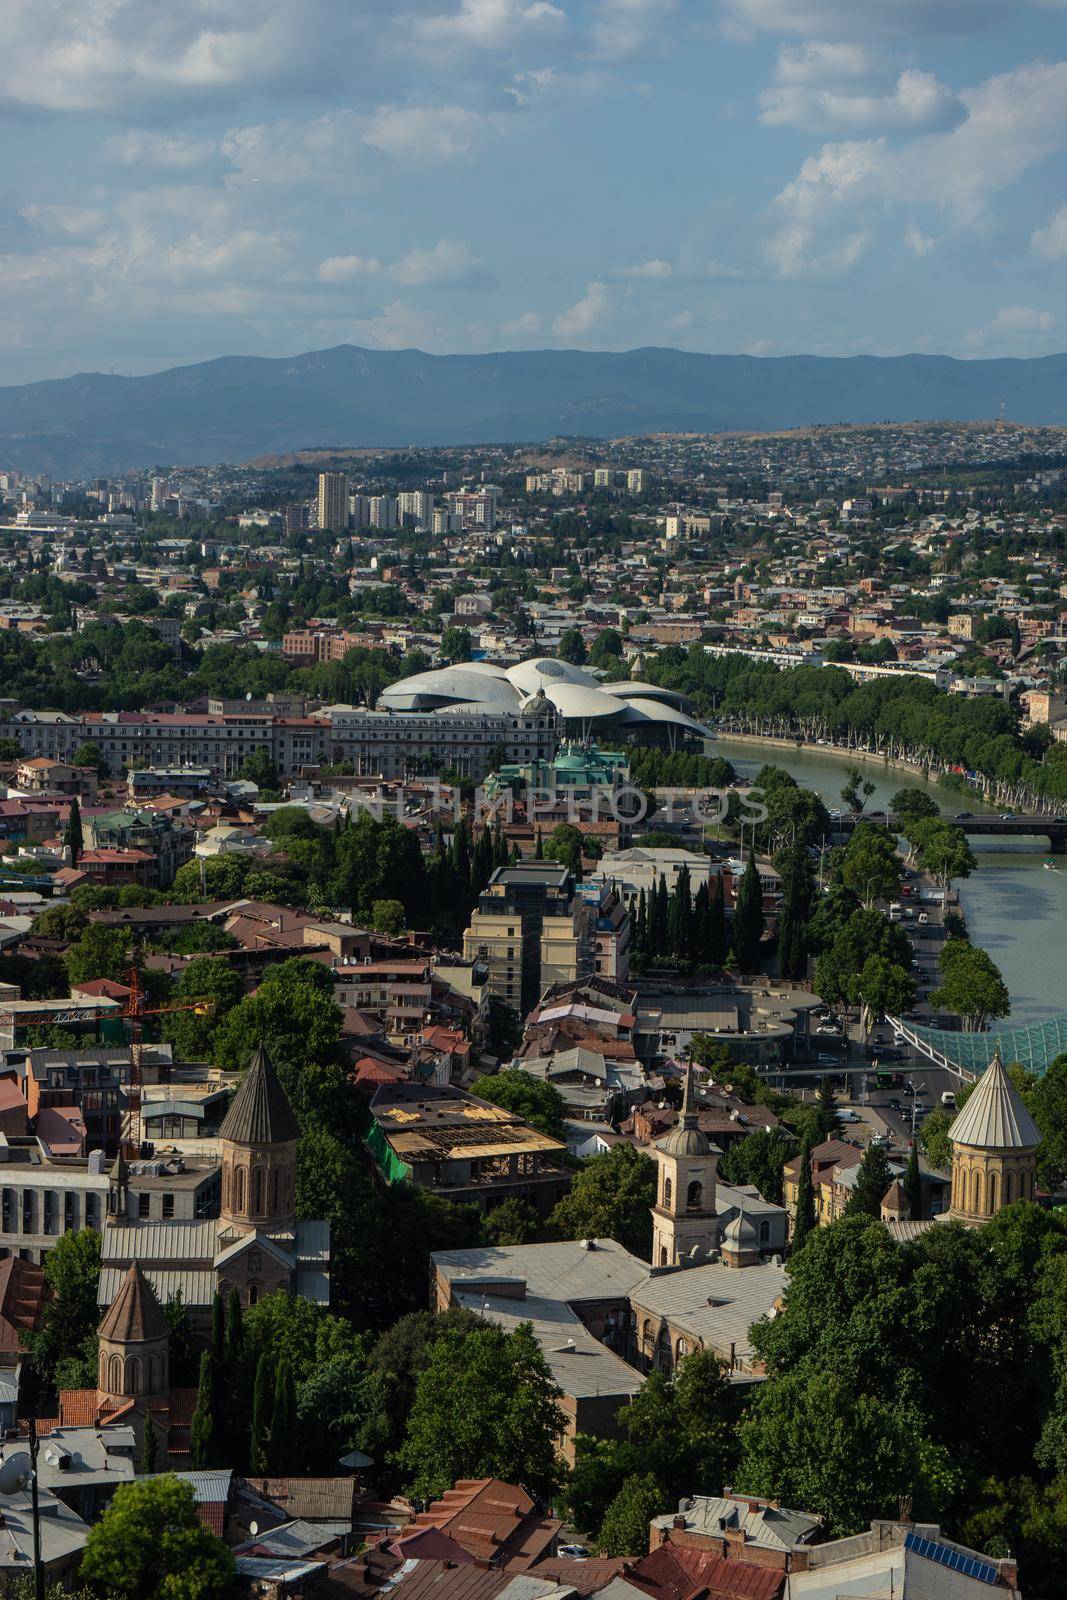 Tbilisi's overview from Narikala hill top by Elet